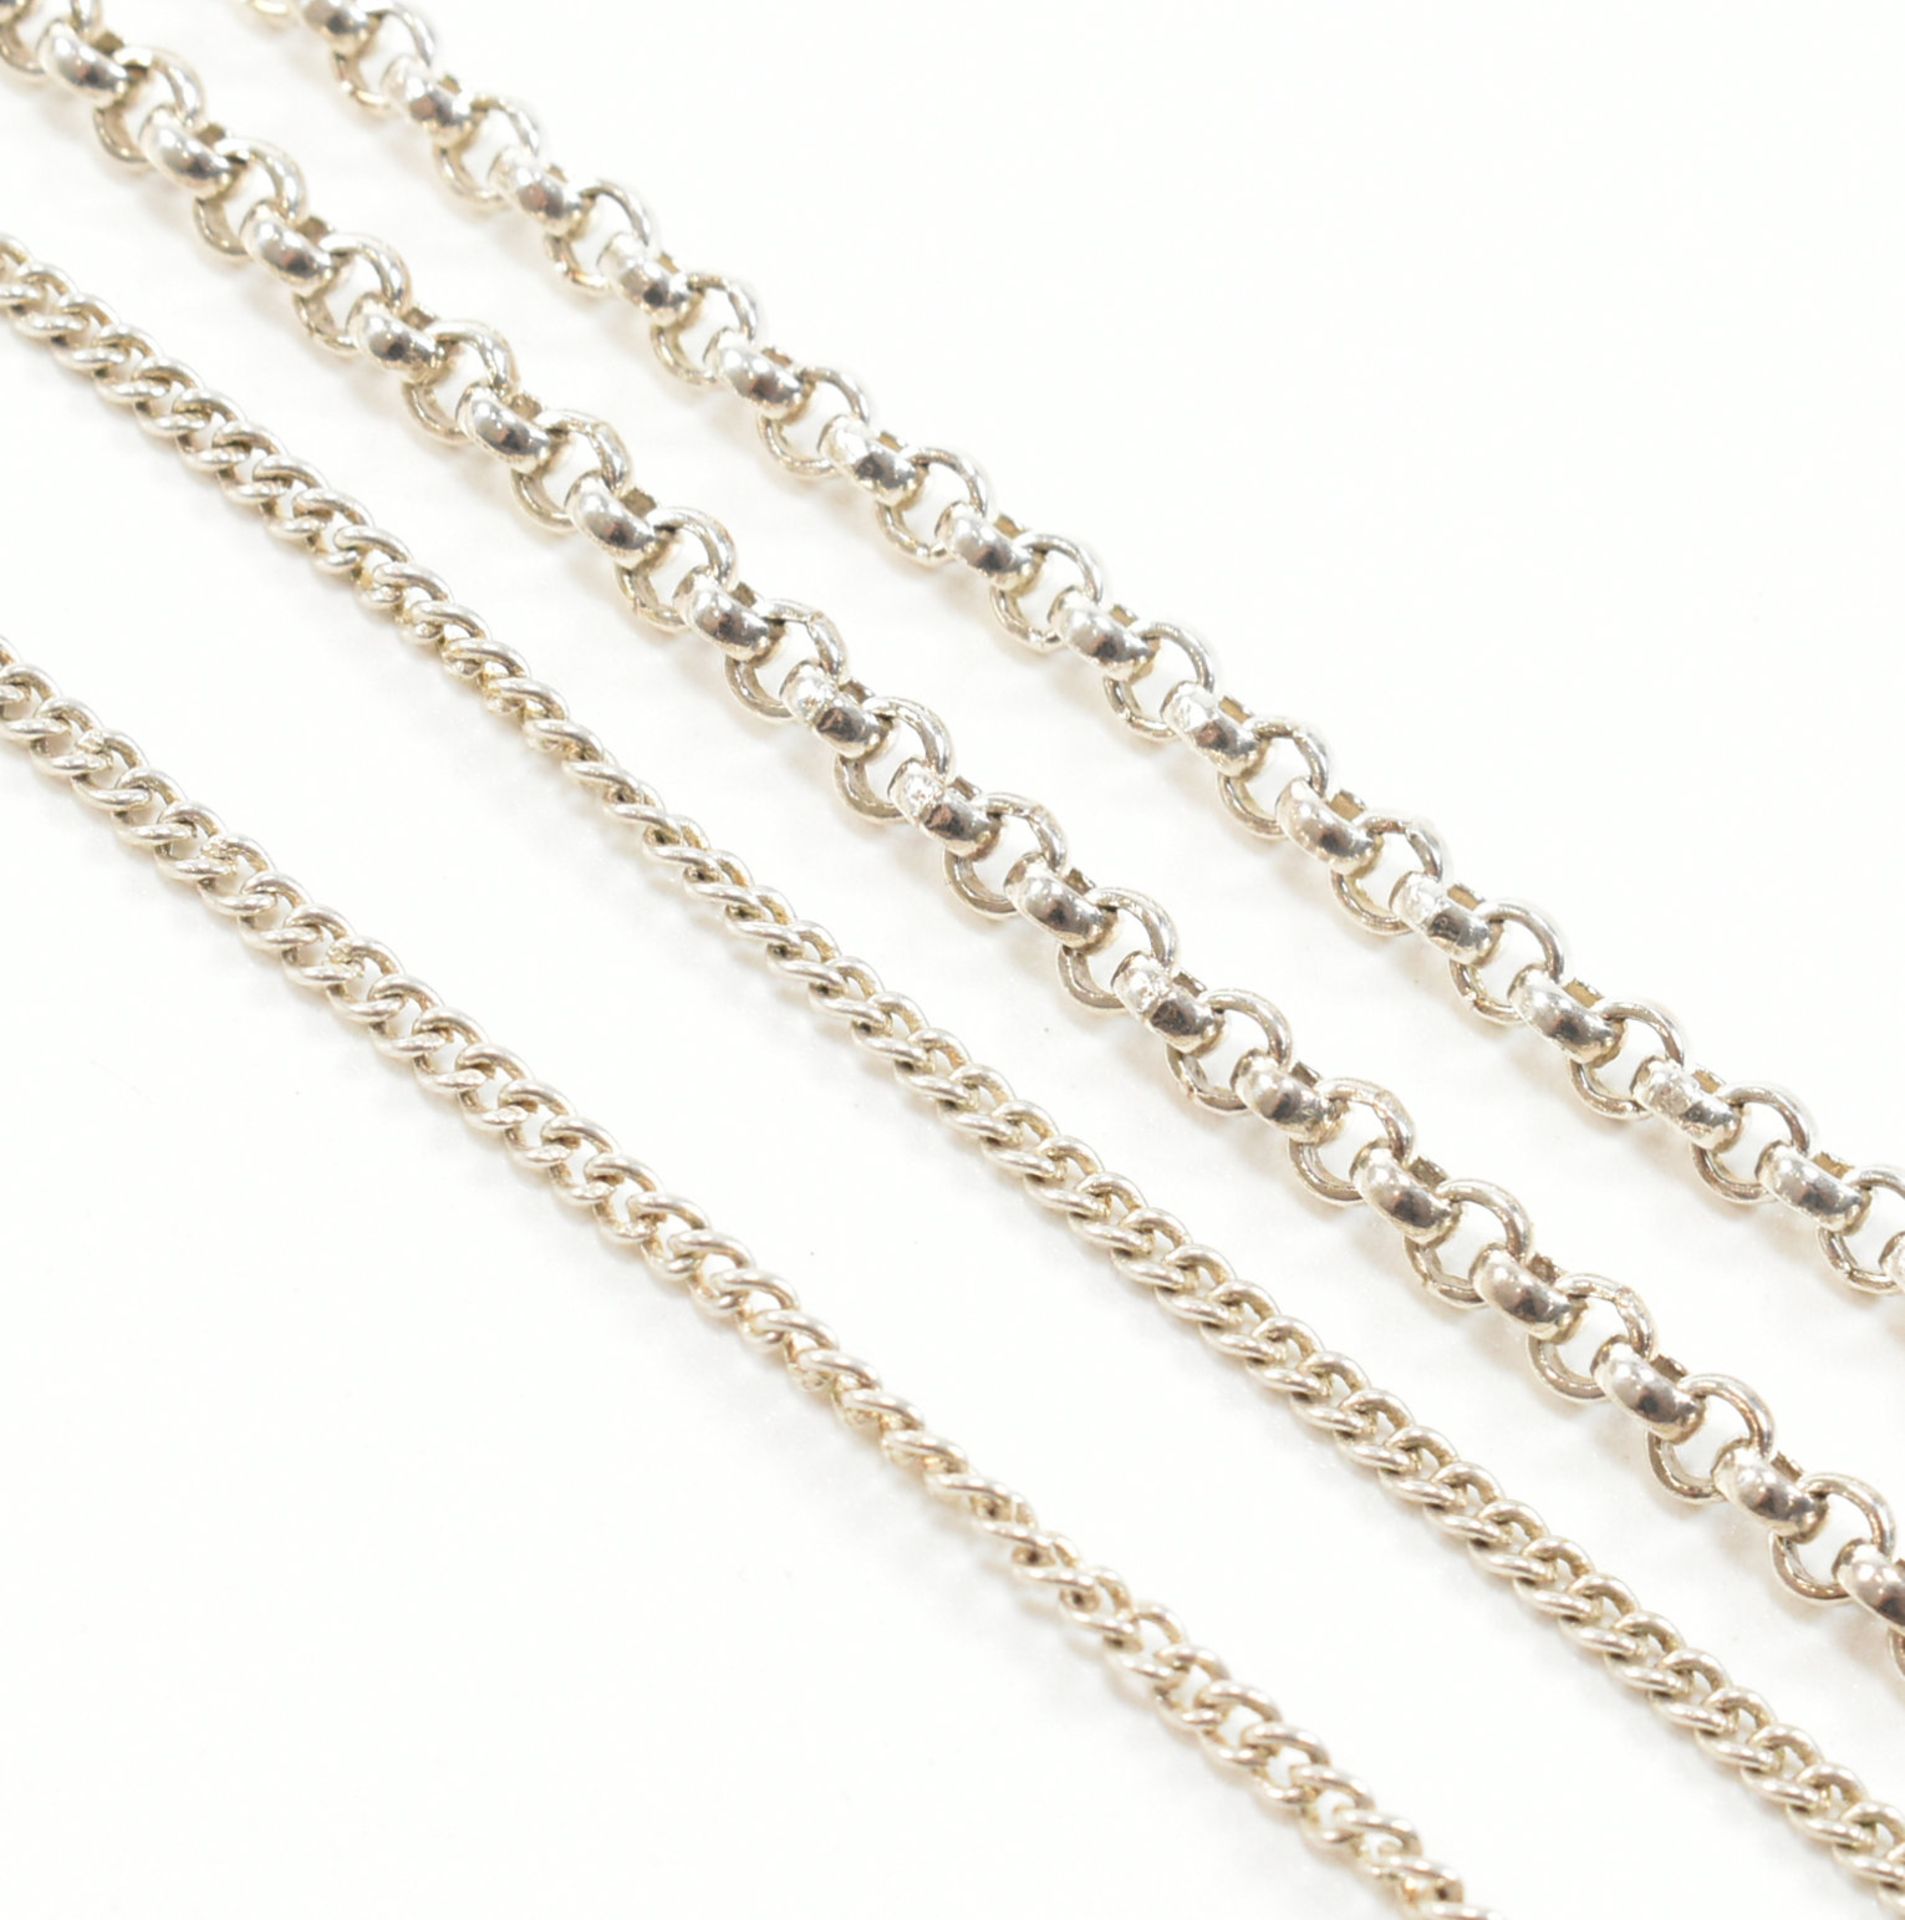 TWO 925 SILVER & BLACK STONE CHAIN NECKLACES - Image 4 of 5